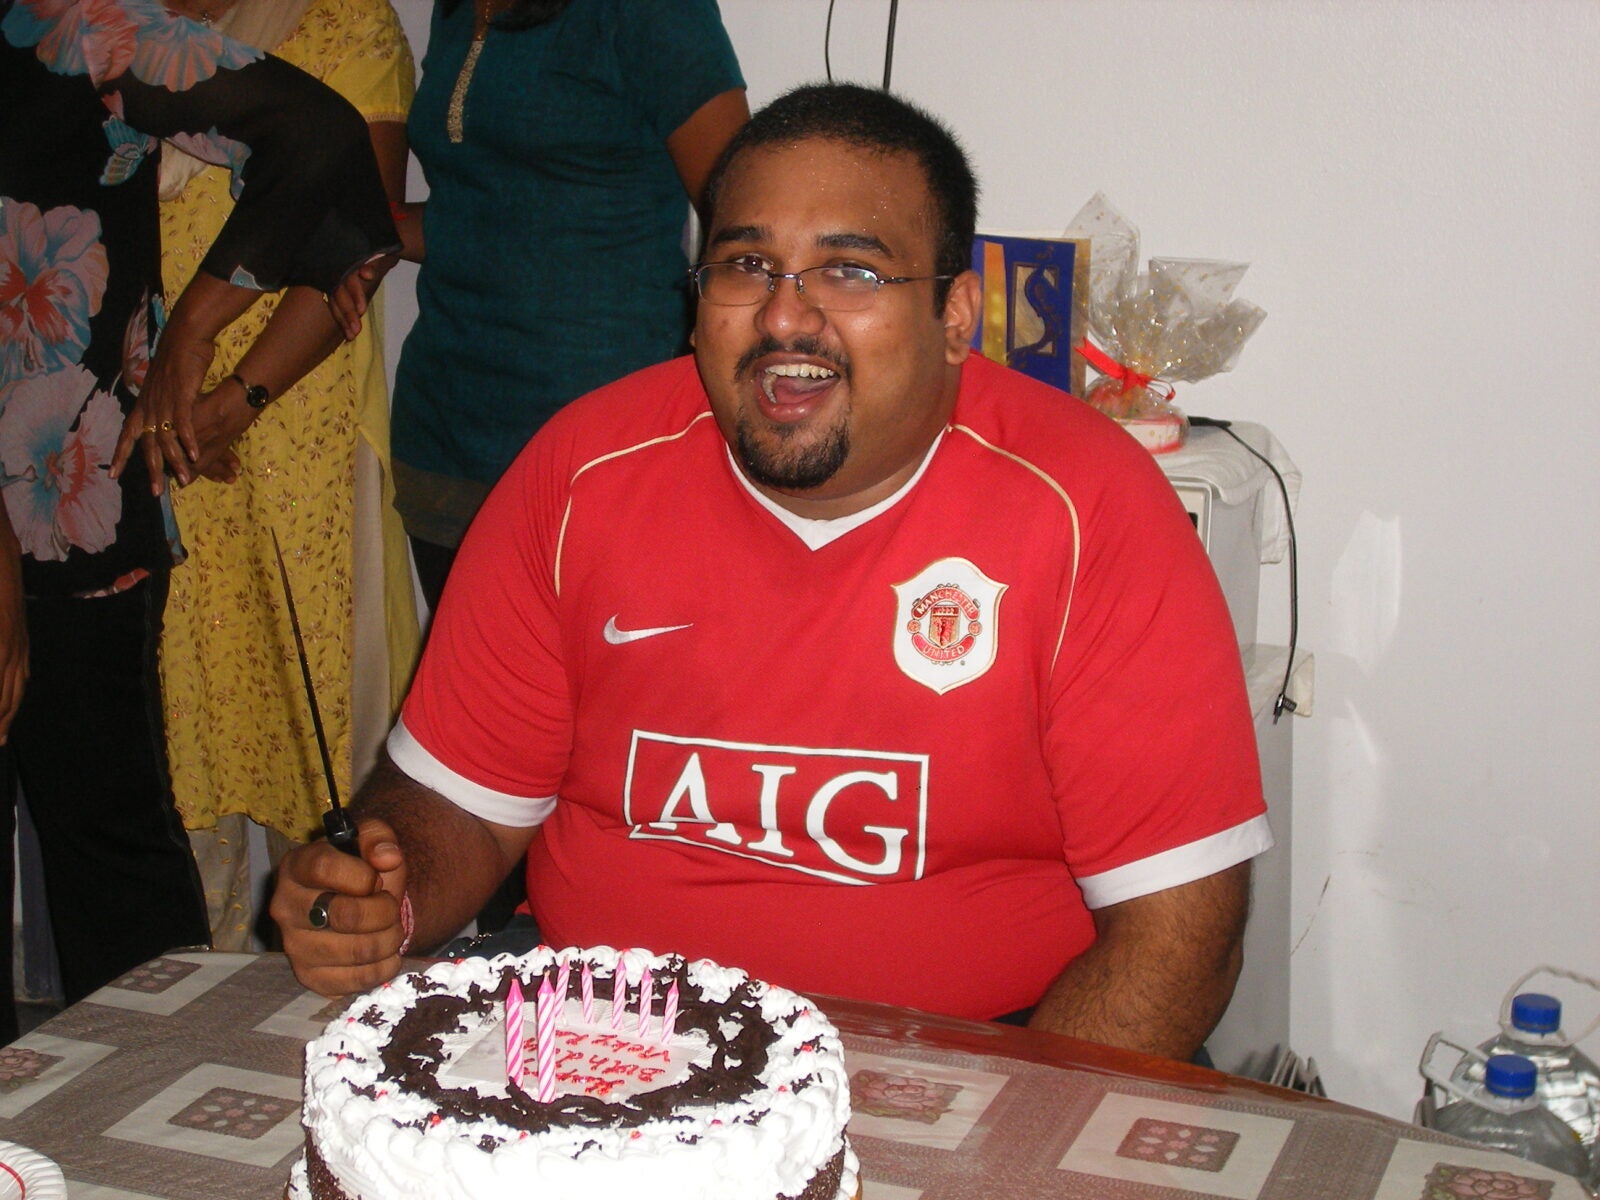 An Indian Man With Short Hair And Square Glasses Smile With A 12 Inch Cake In Front Of Him.